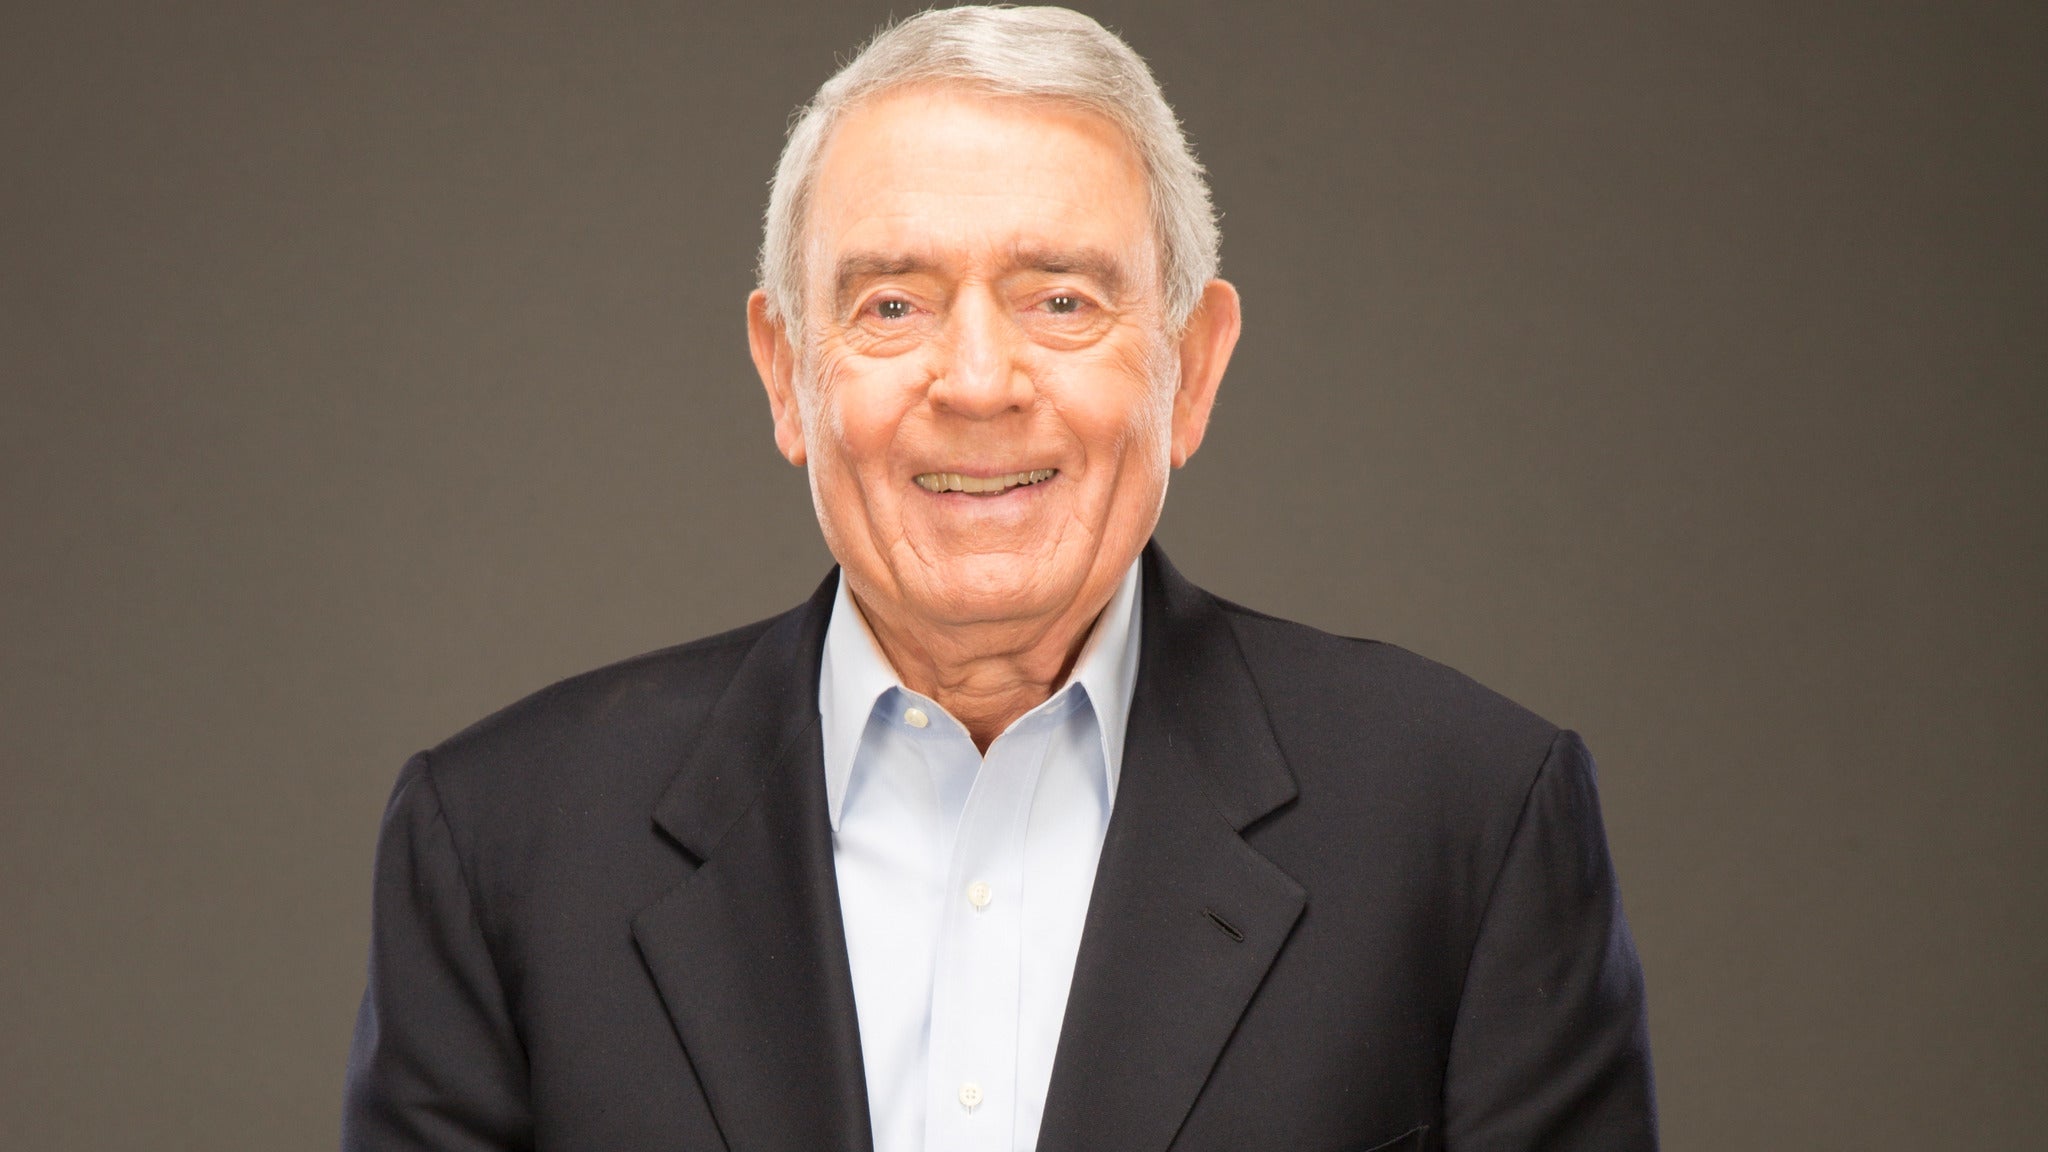 Dan Rather - Stories Of A Lifetime - Live at the Minetta Lane